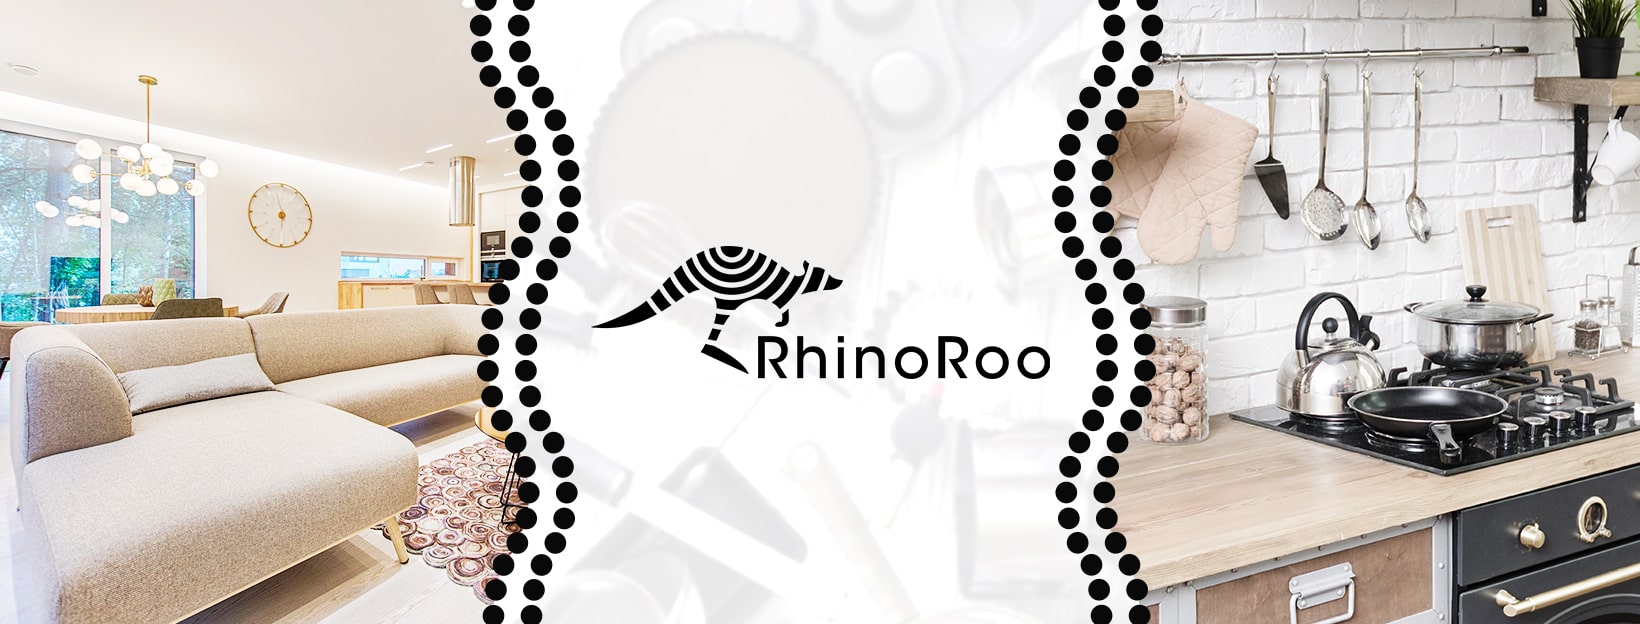 RhinoRoo Logo with Dining and Kitchen Pictured